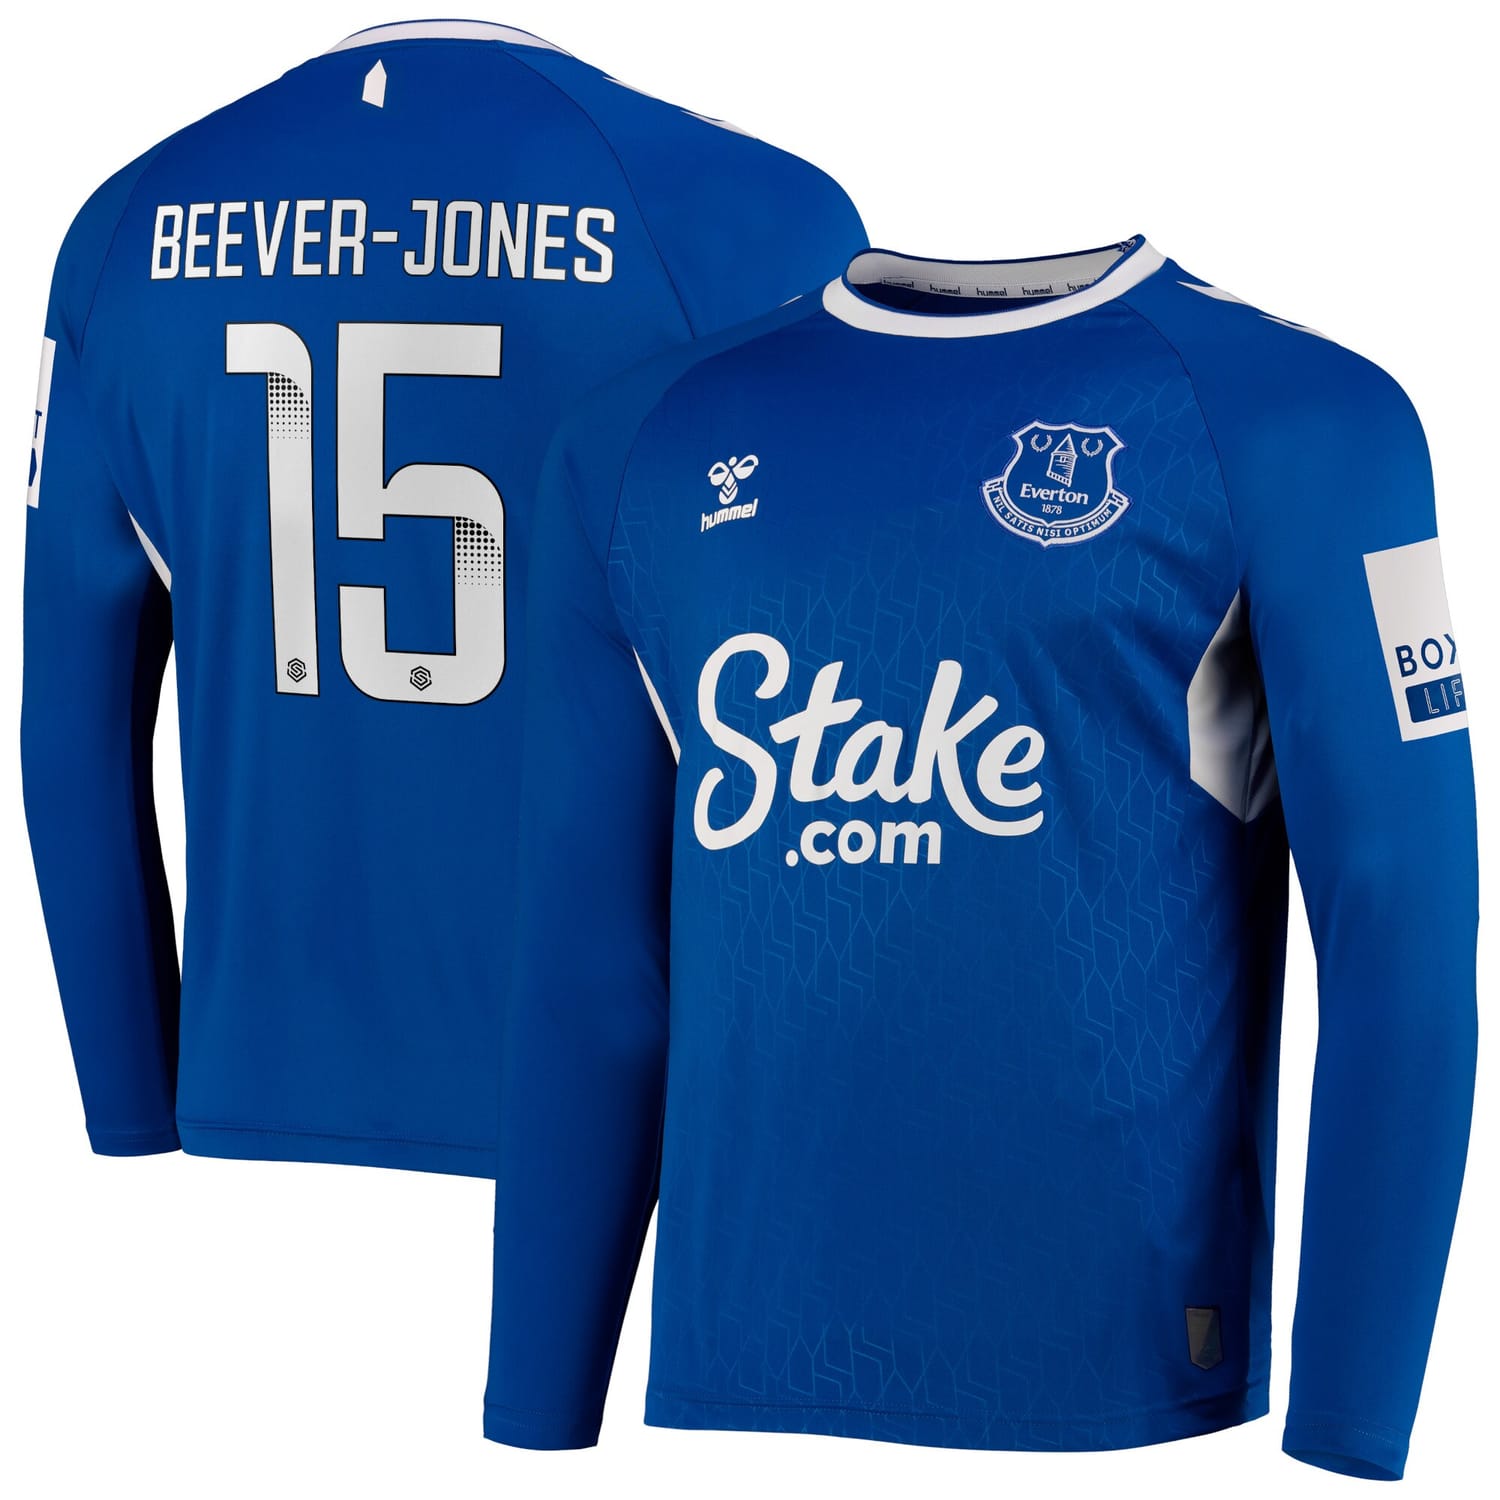 Premier League Everton Home WSL Jersey Shirt Long Sleeve 2022-23 player Aggie Beever-Jones 15 printing for Men